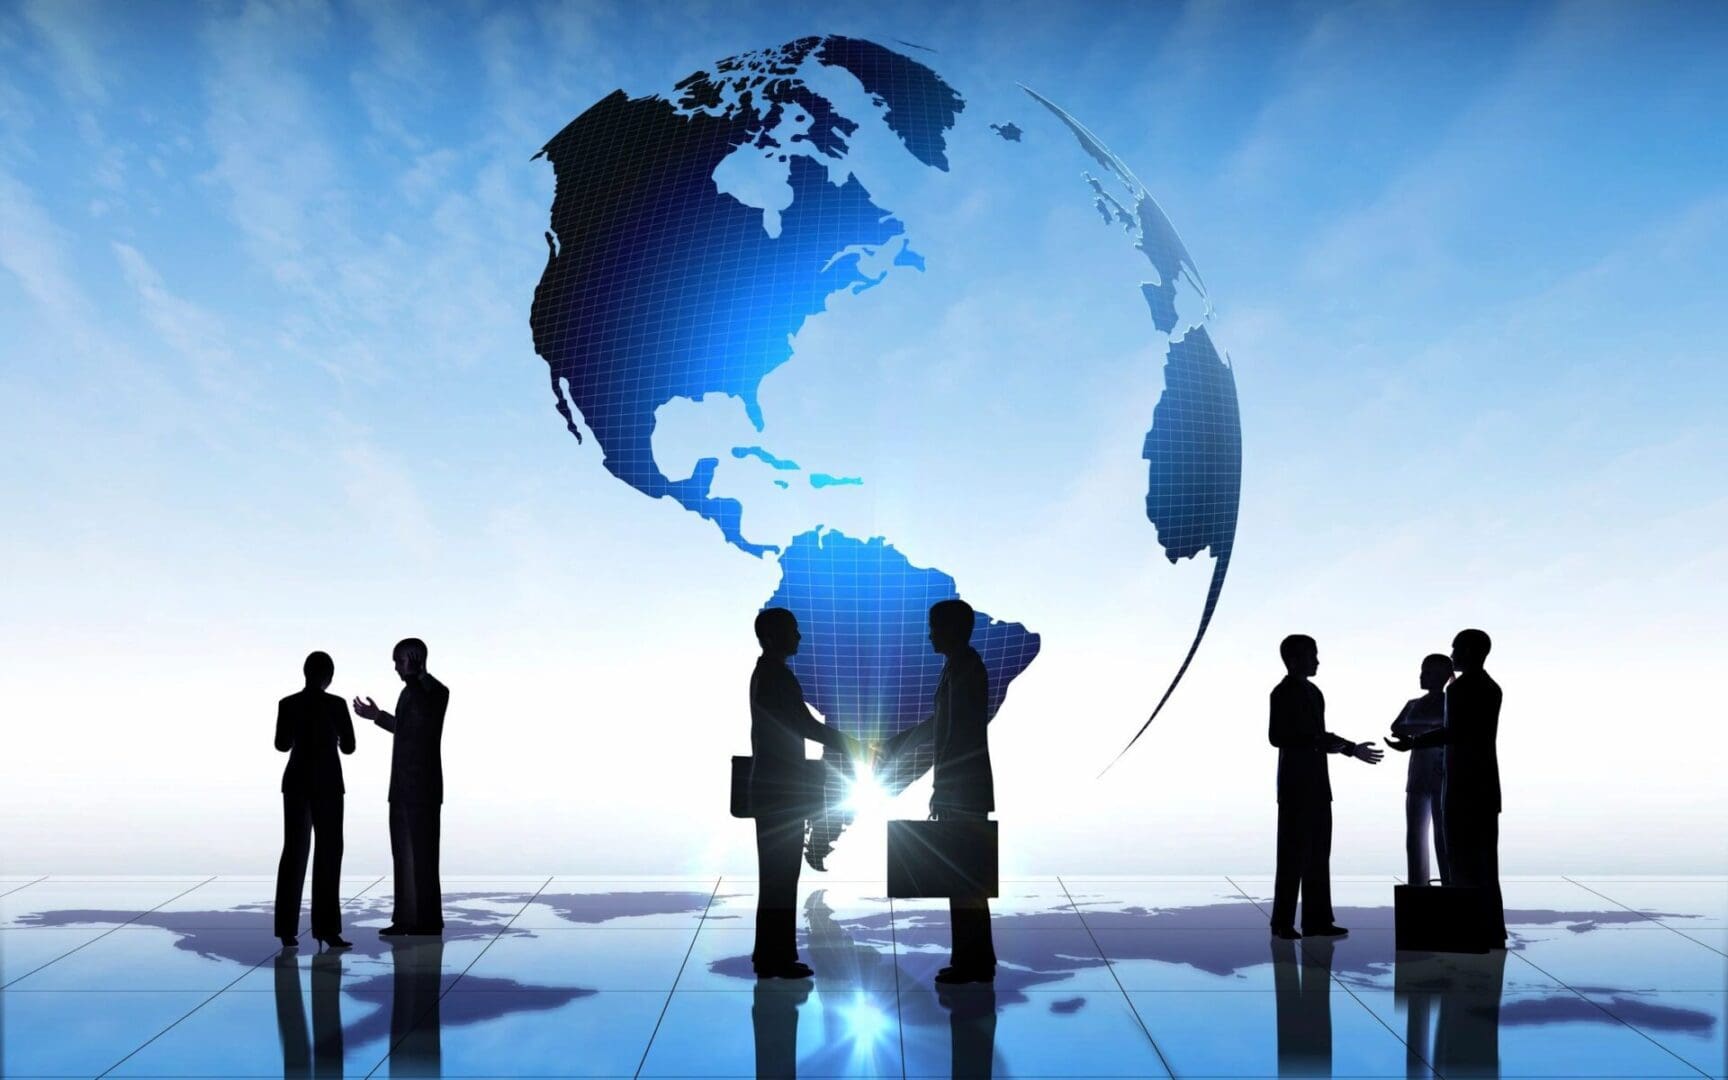 Silhouettes of business people standing in front of a globe.